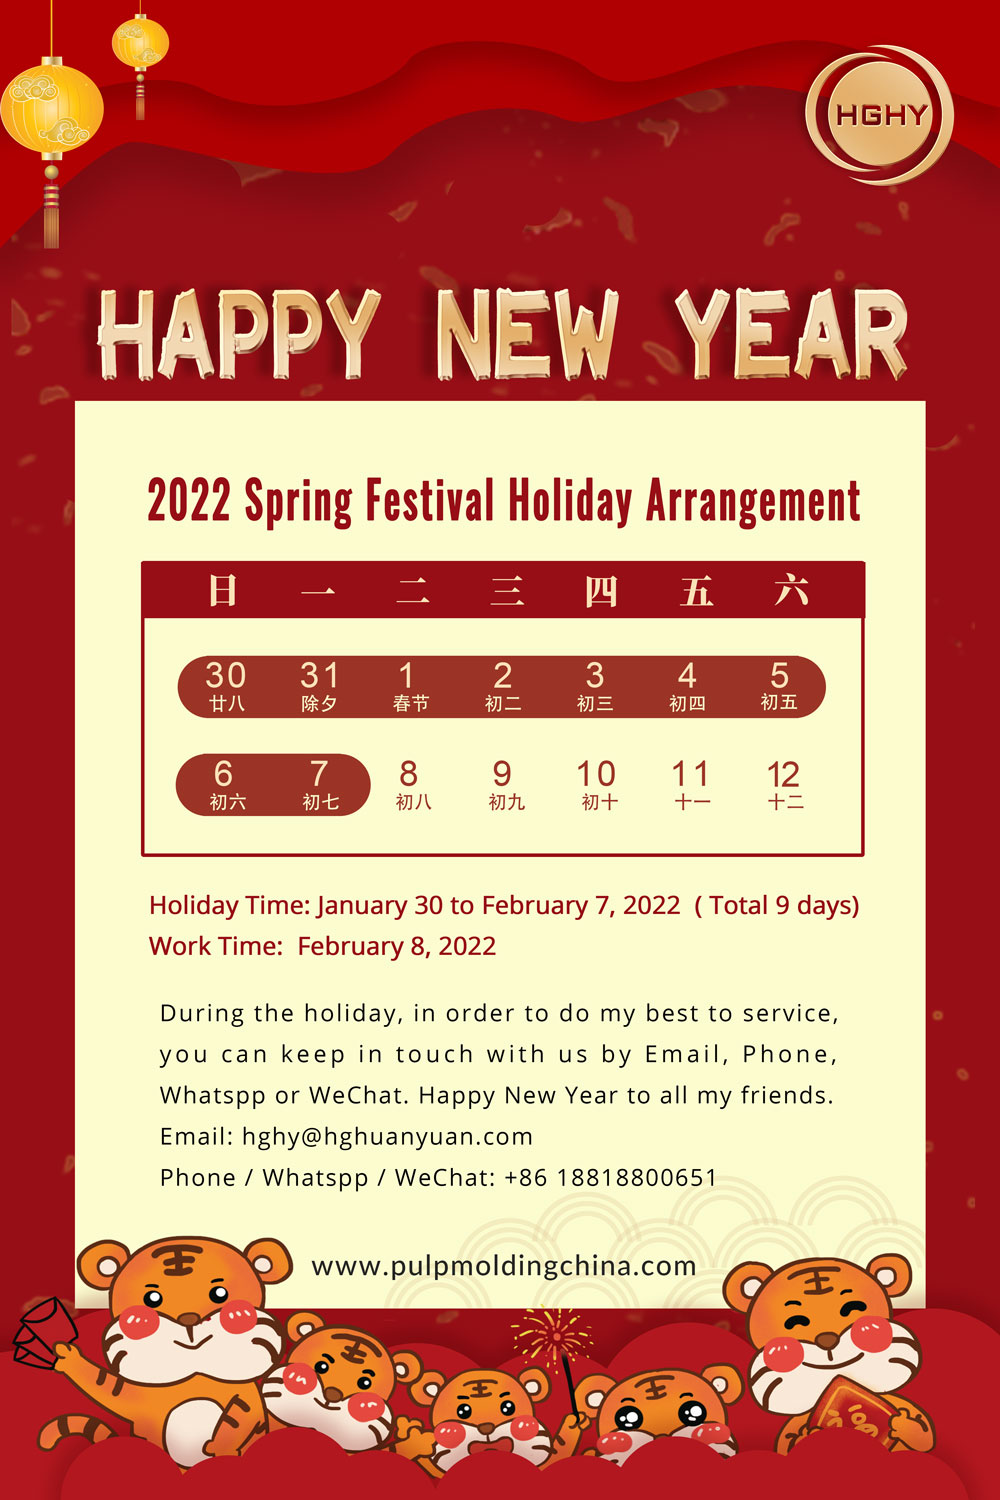 HGHY 2022 Spring Festival Holiday Arrangement